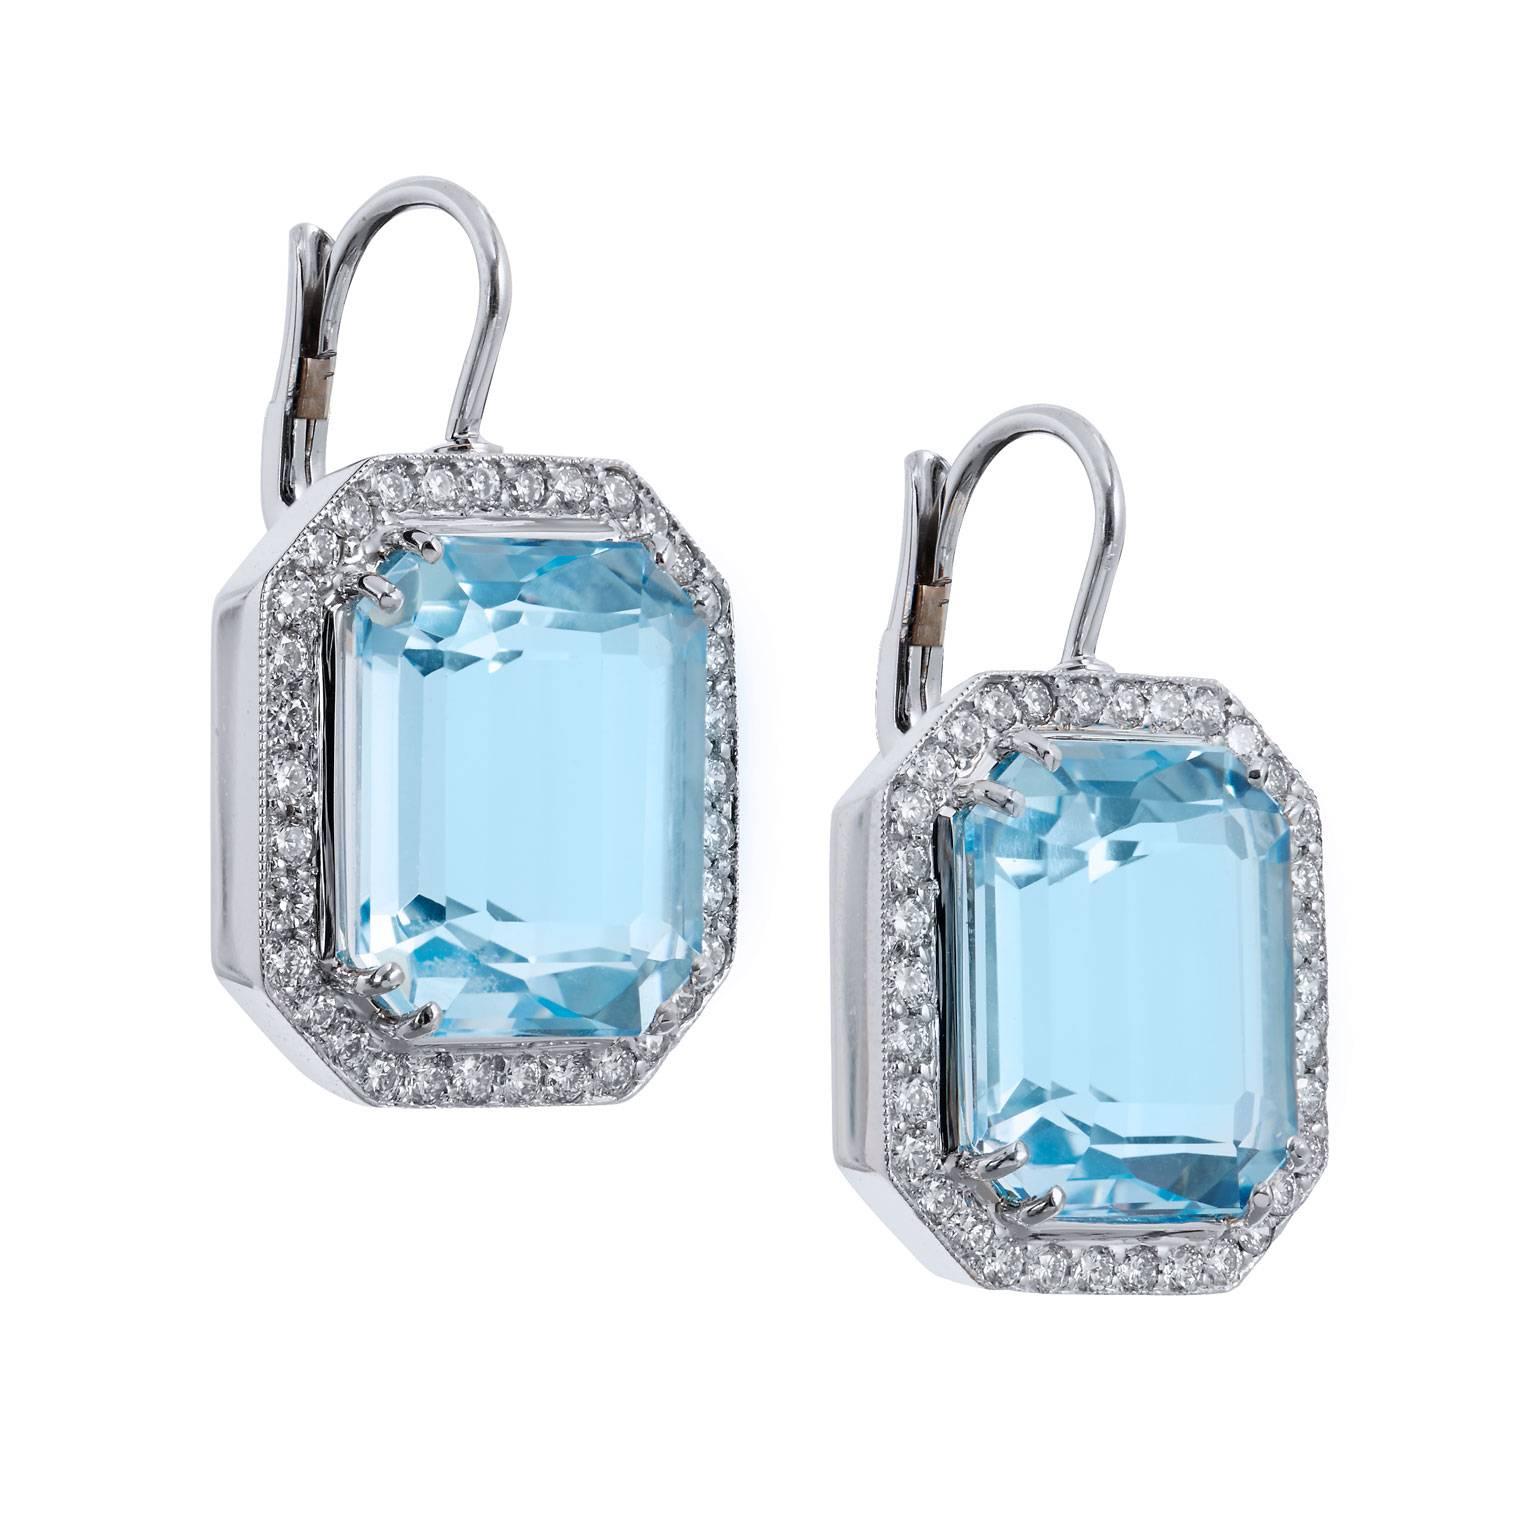 Enjoy a piece of simple elegance with these bezel set blue topaz and diamond pave lever-back earrings. Handcrafted in 18 karat white gold, these earrings feature 0.66 carat of pave set diamond (F/G/VS1) sweeping the bezel surrounding the 18.29 